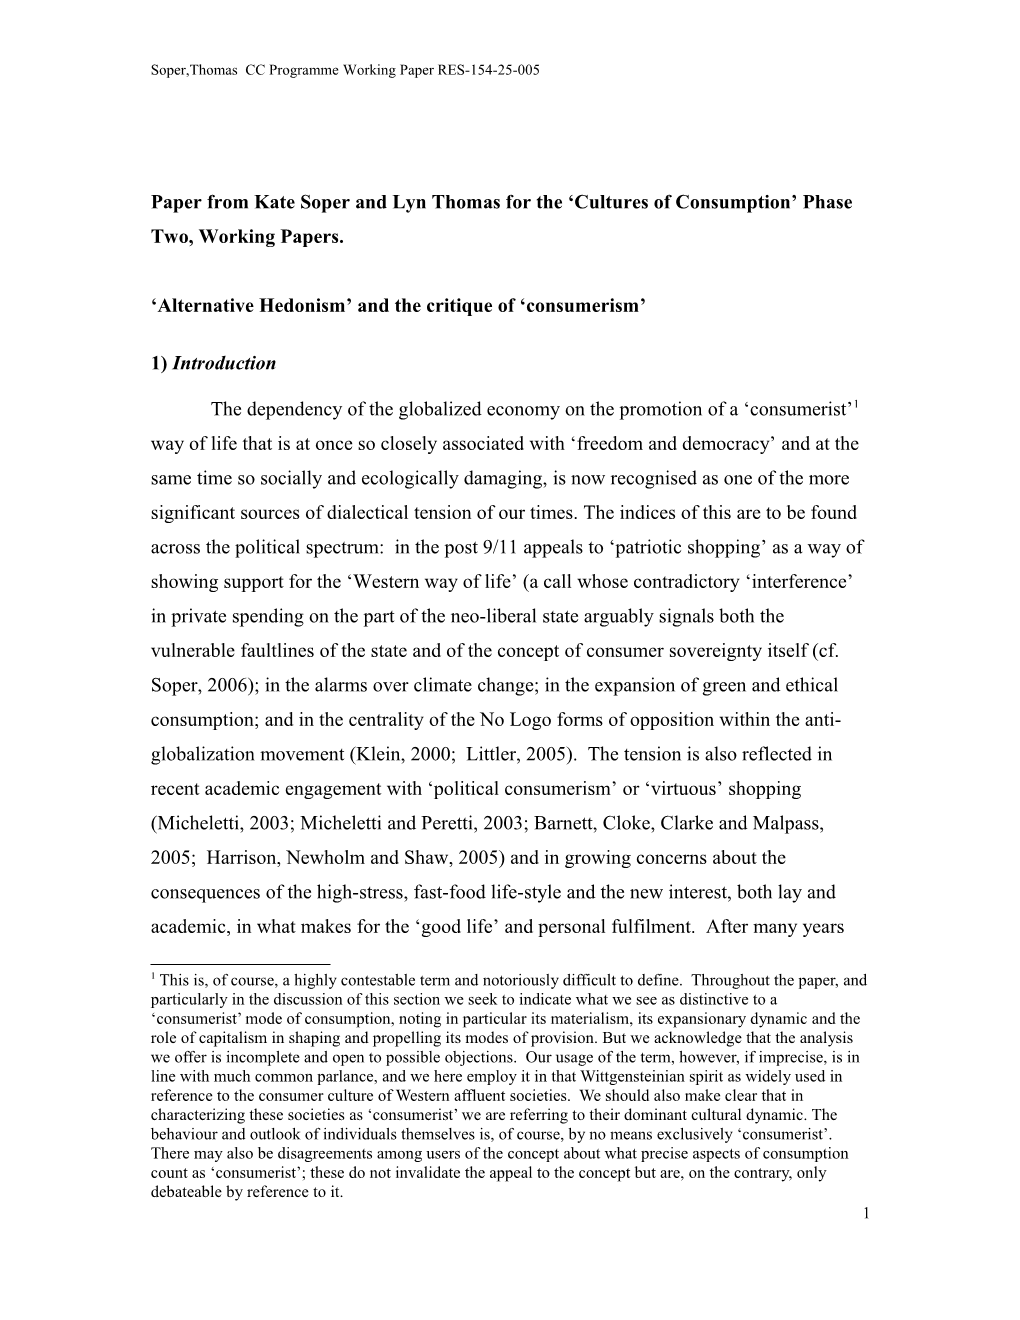 Paper from Kate Soper and Lyn Thomas for the Cultures of Consumption Phase Two, Working Papers s1